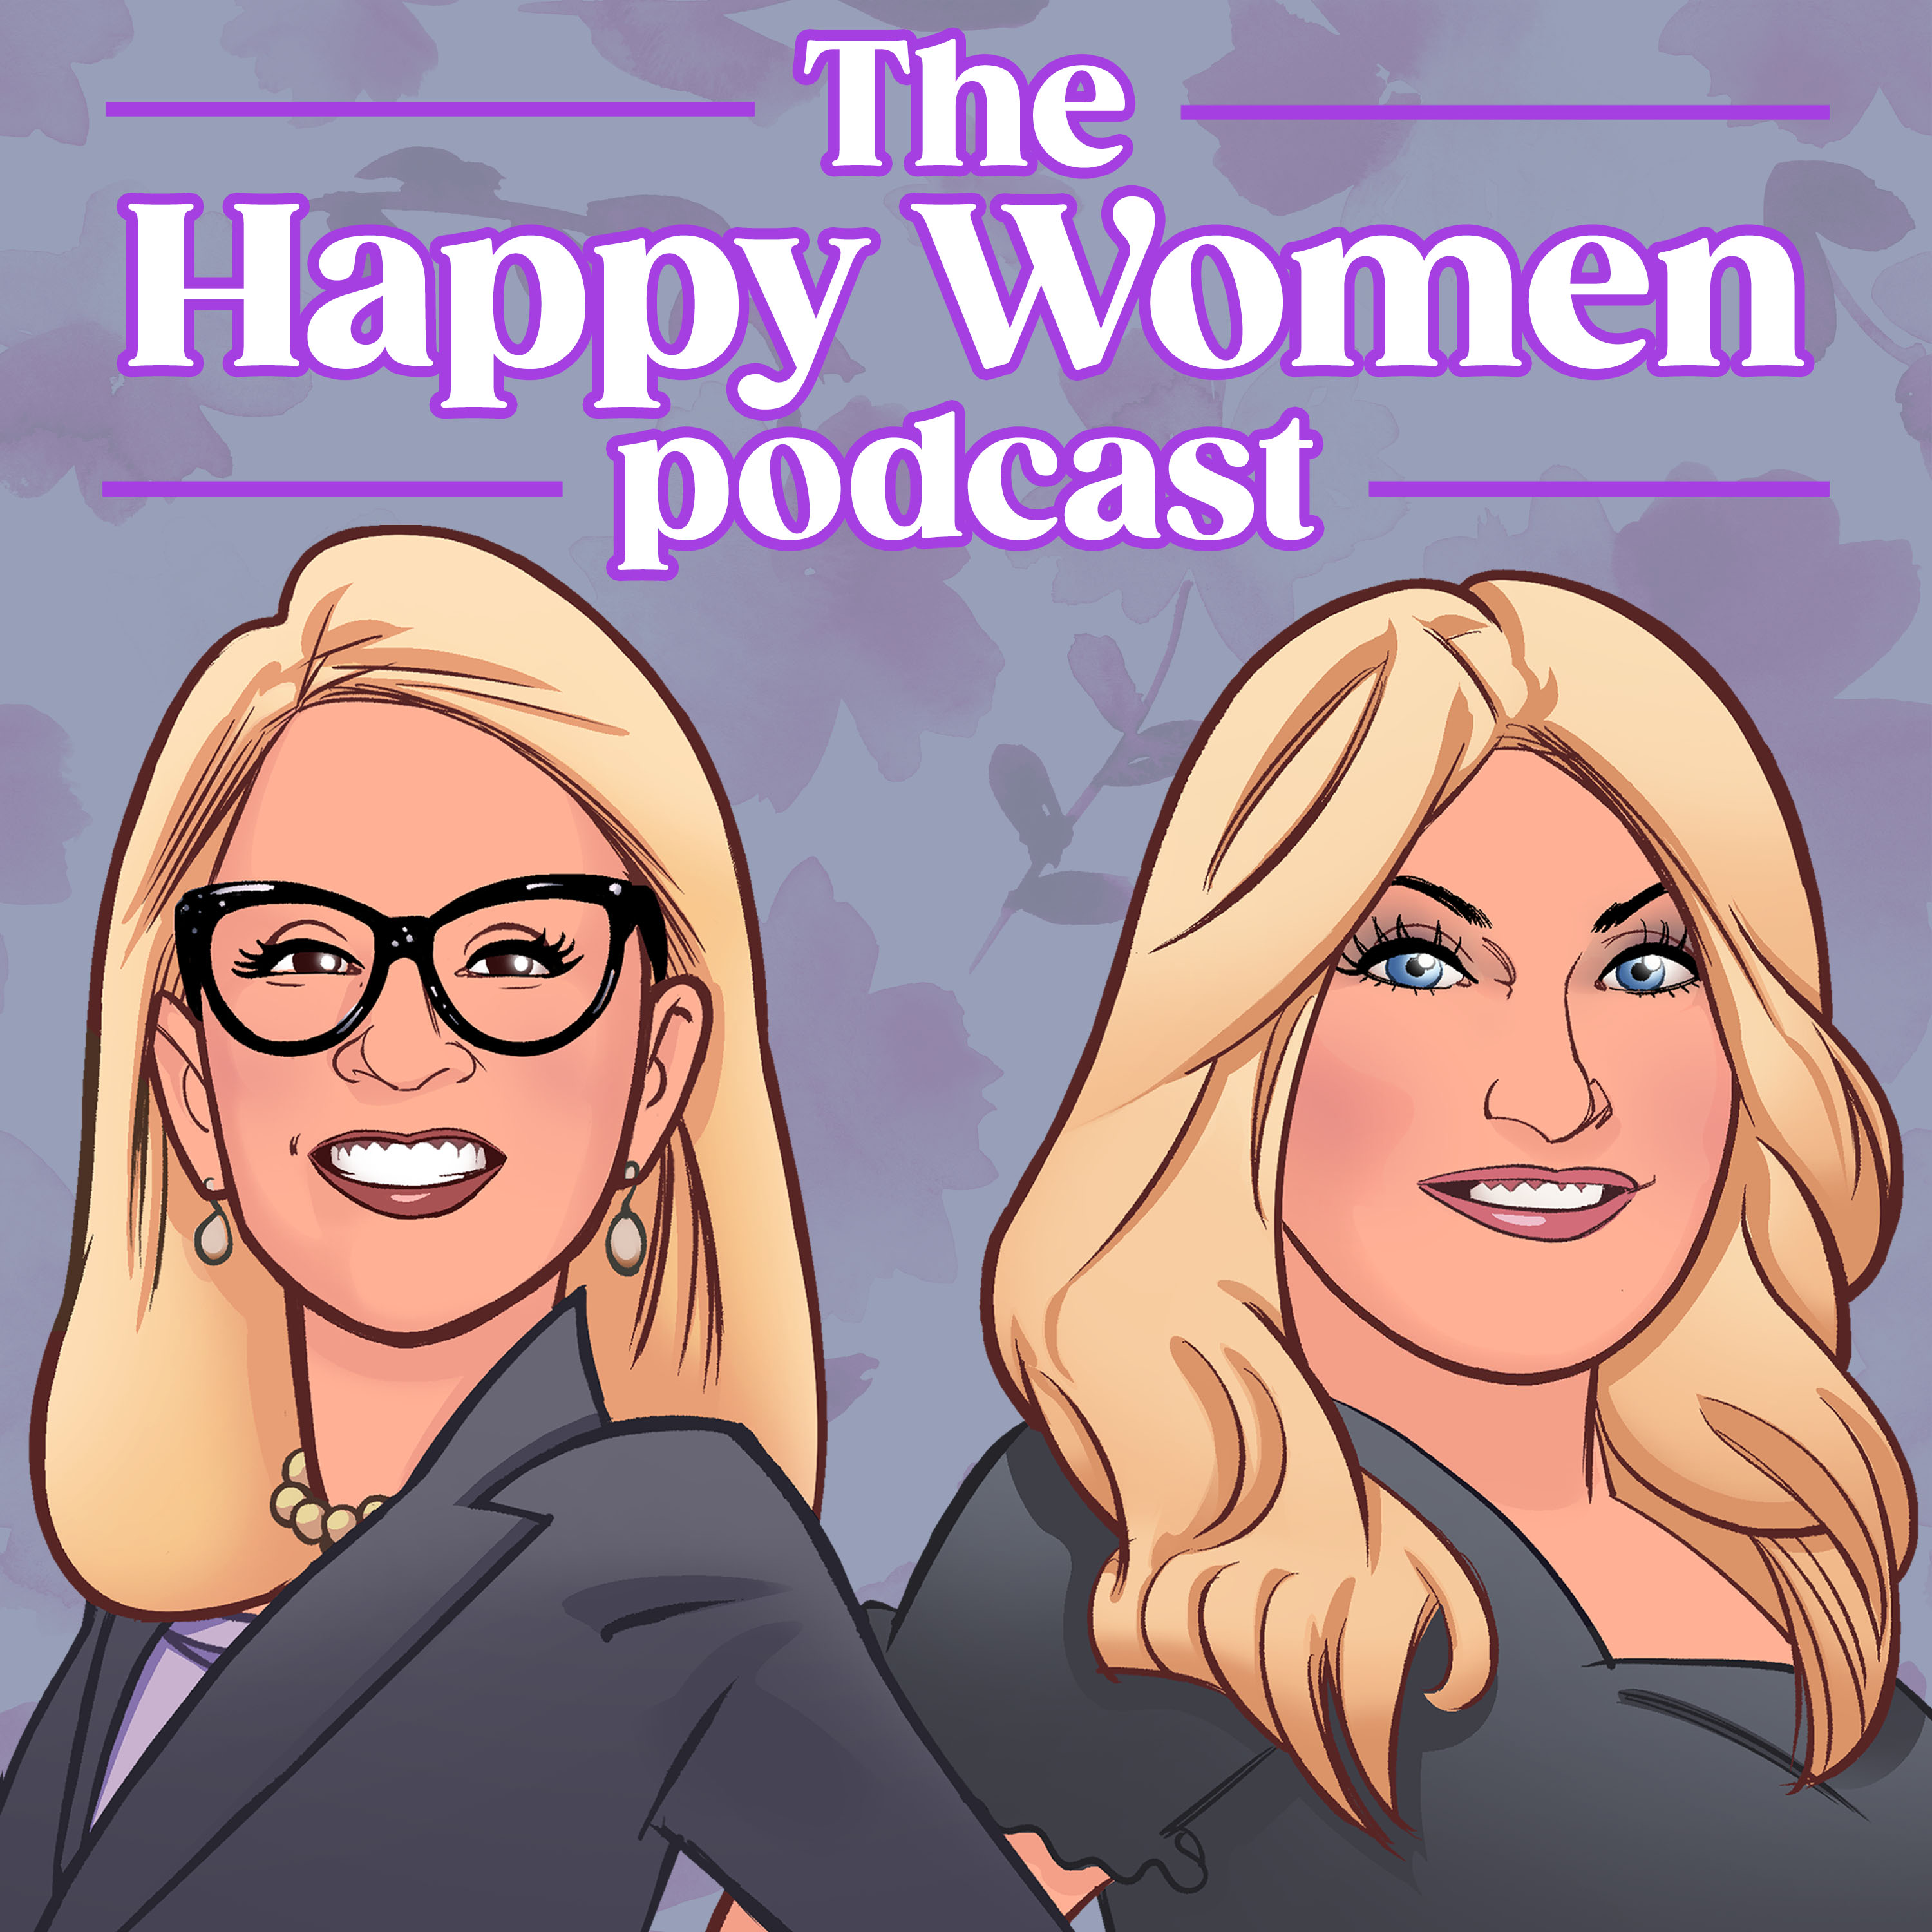 COMING APRIL 23: The Happy Women Podcast